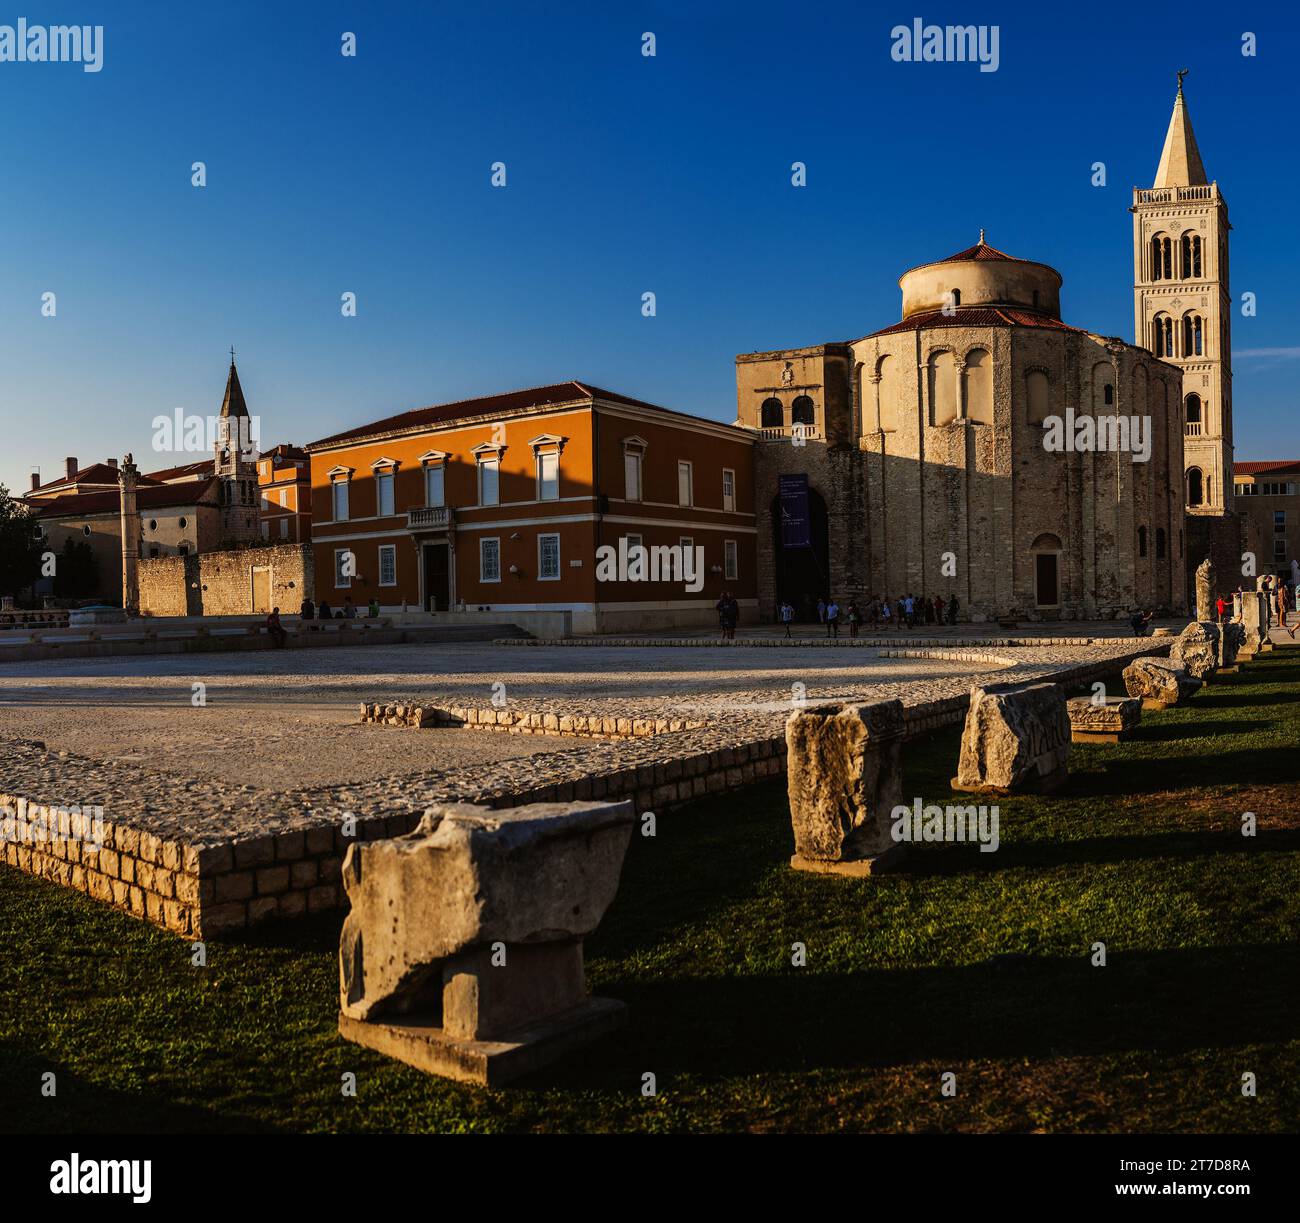 Church of St. Donatus is church located in Zadar, Croatia. Its name refers to Donatus of Zadar, who began construction on this church in 9th century a Stock Photo